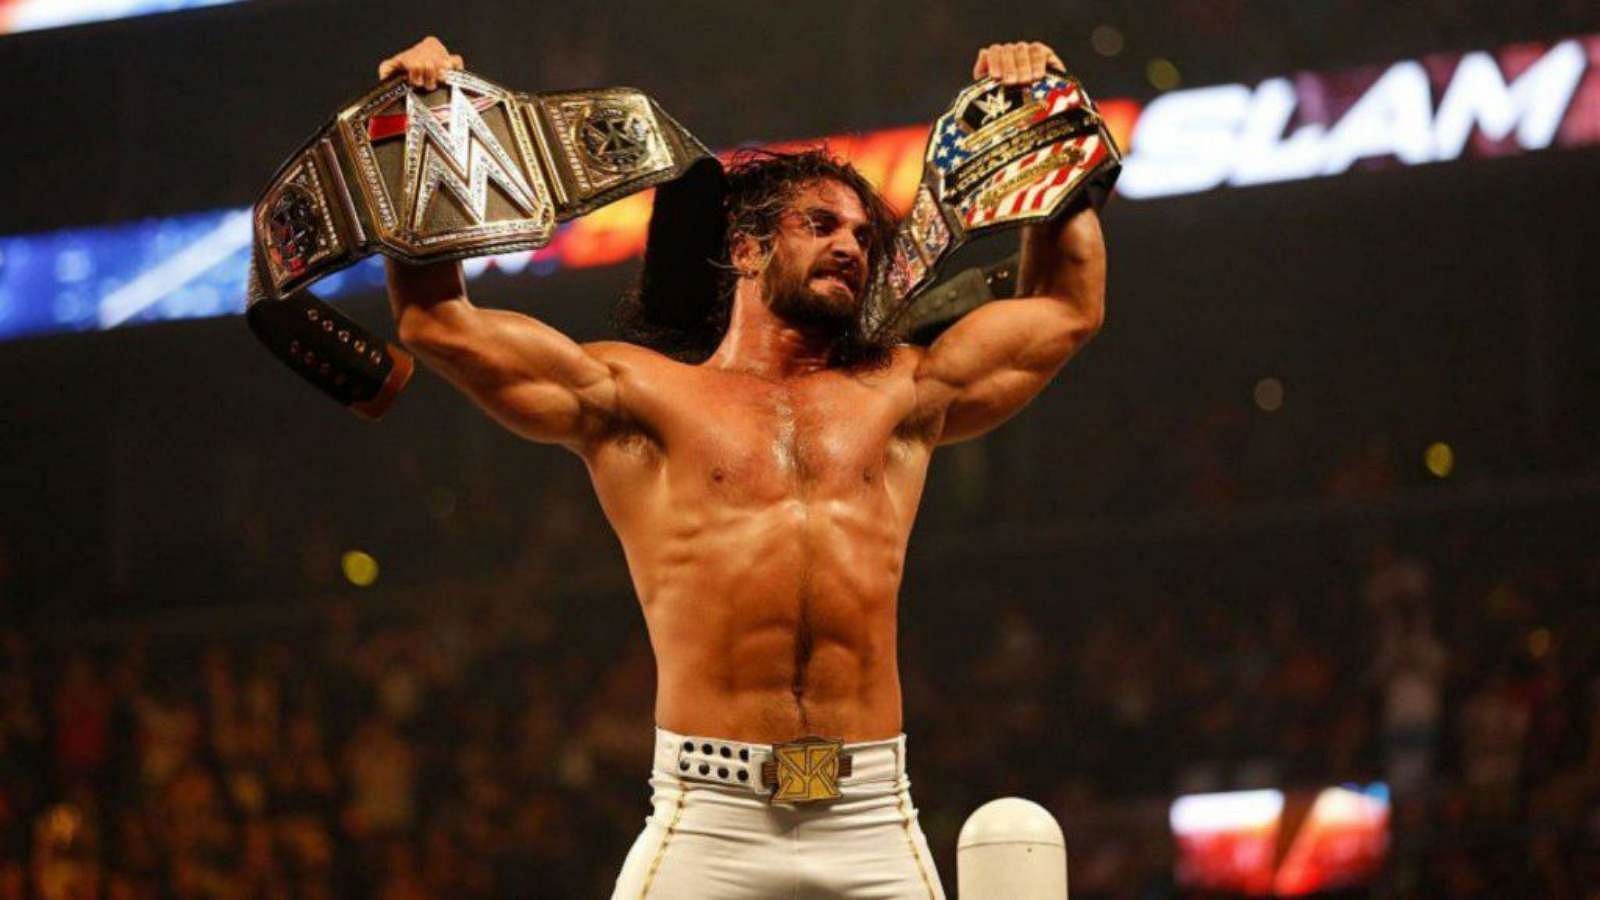 Seth Rollins is now a two-time United States Champion